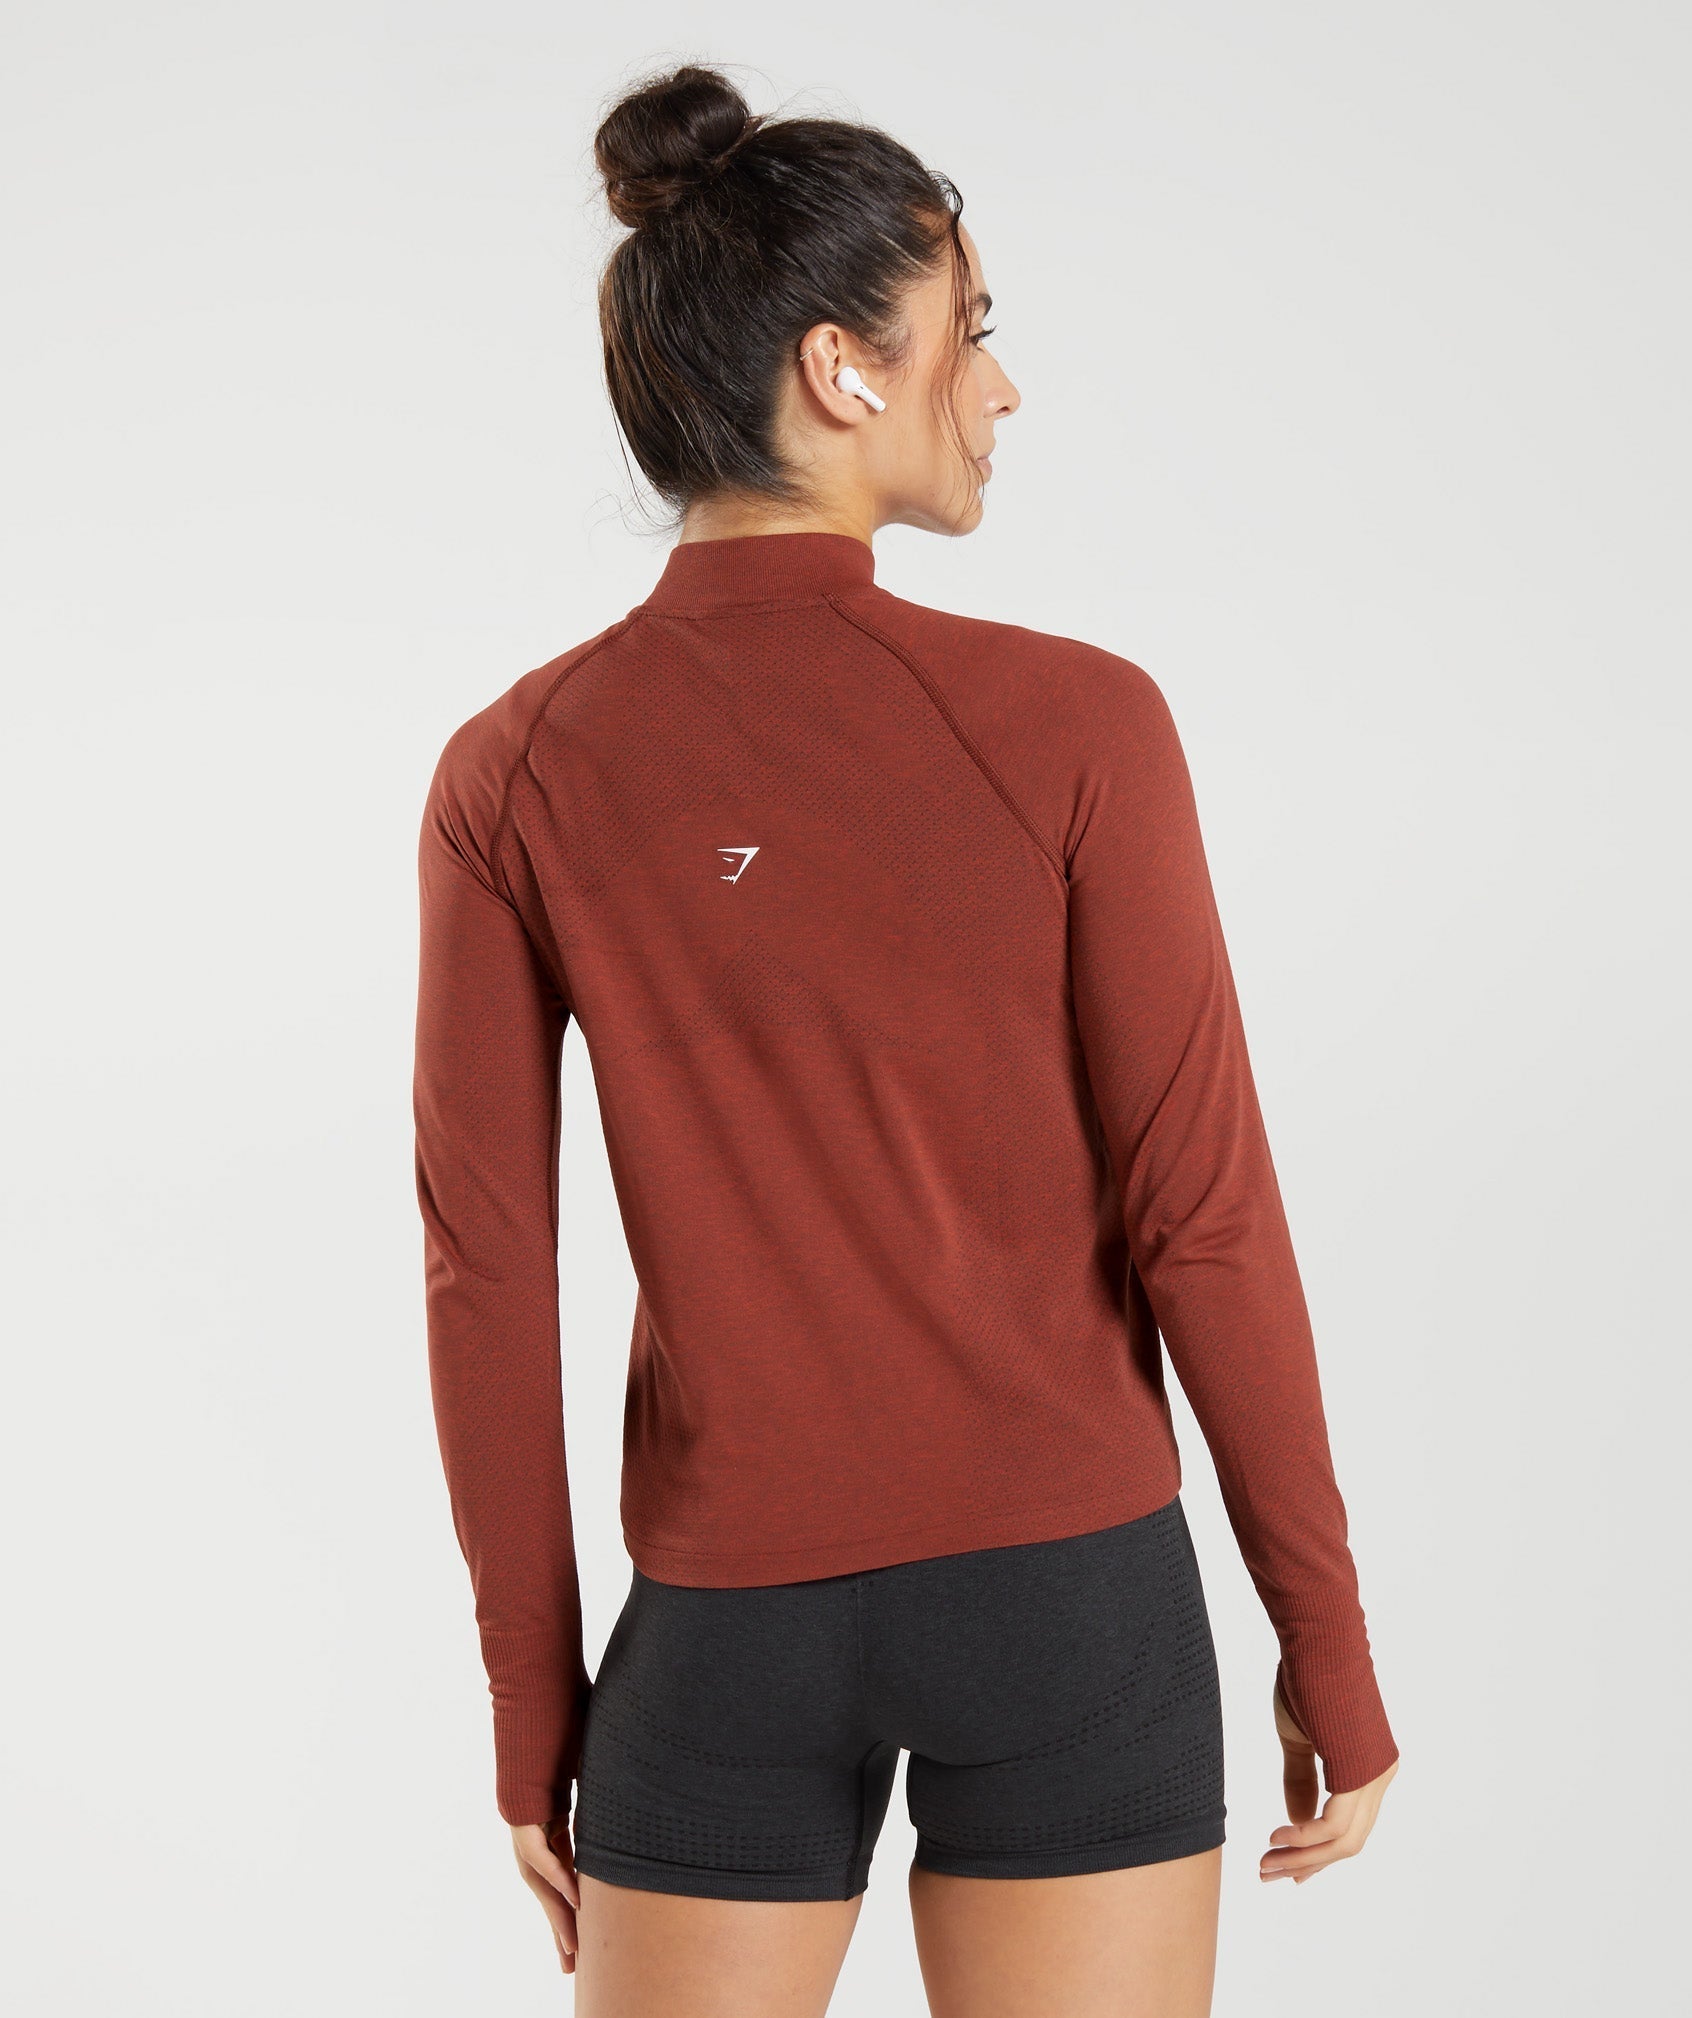 Vital Seamless 2.0 1/4 Track Top in Brick Red Marl - view 2